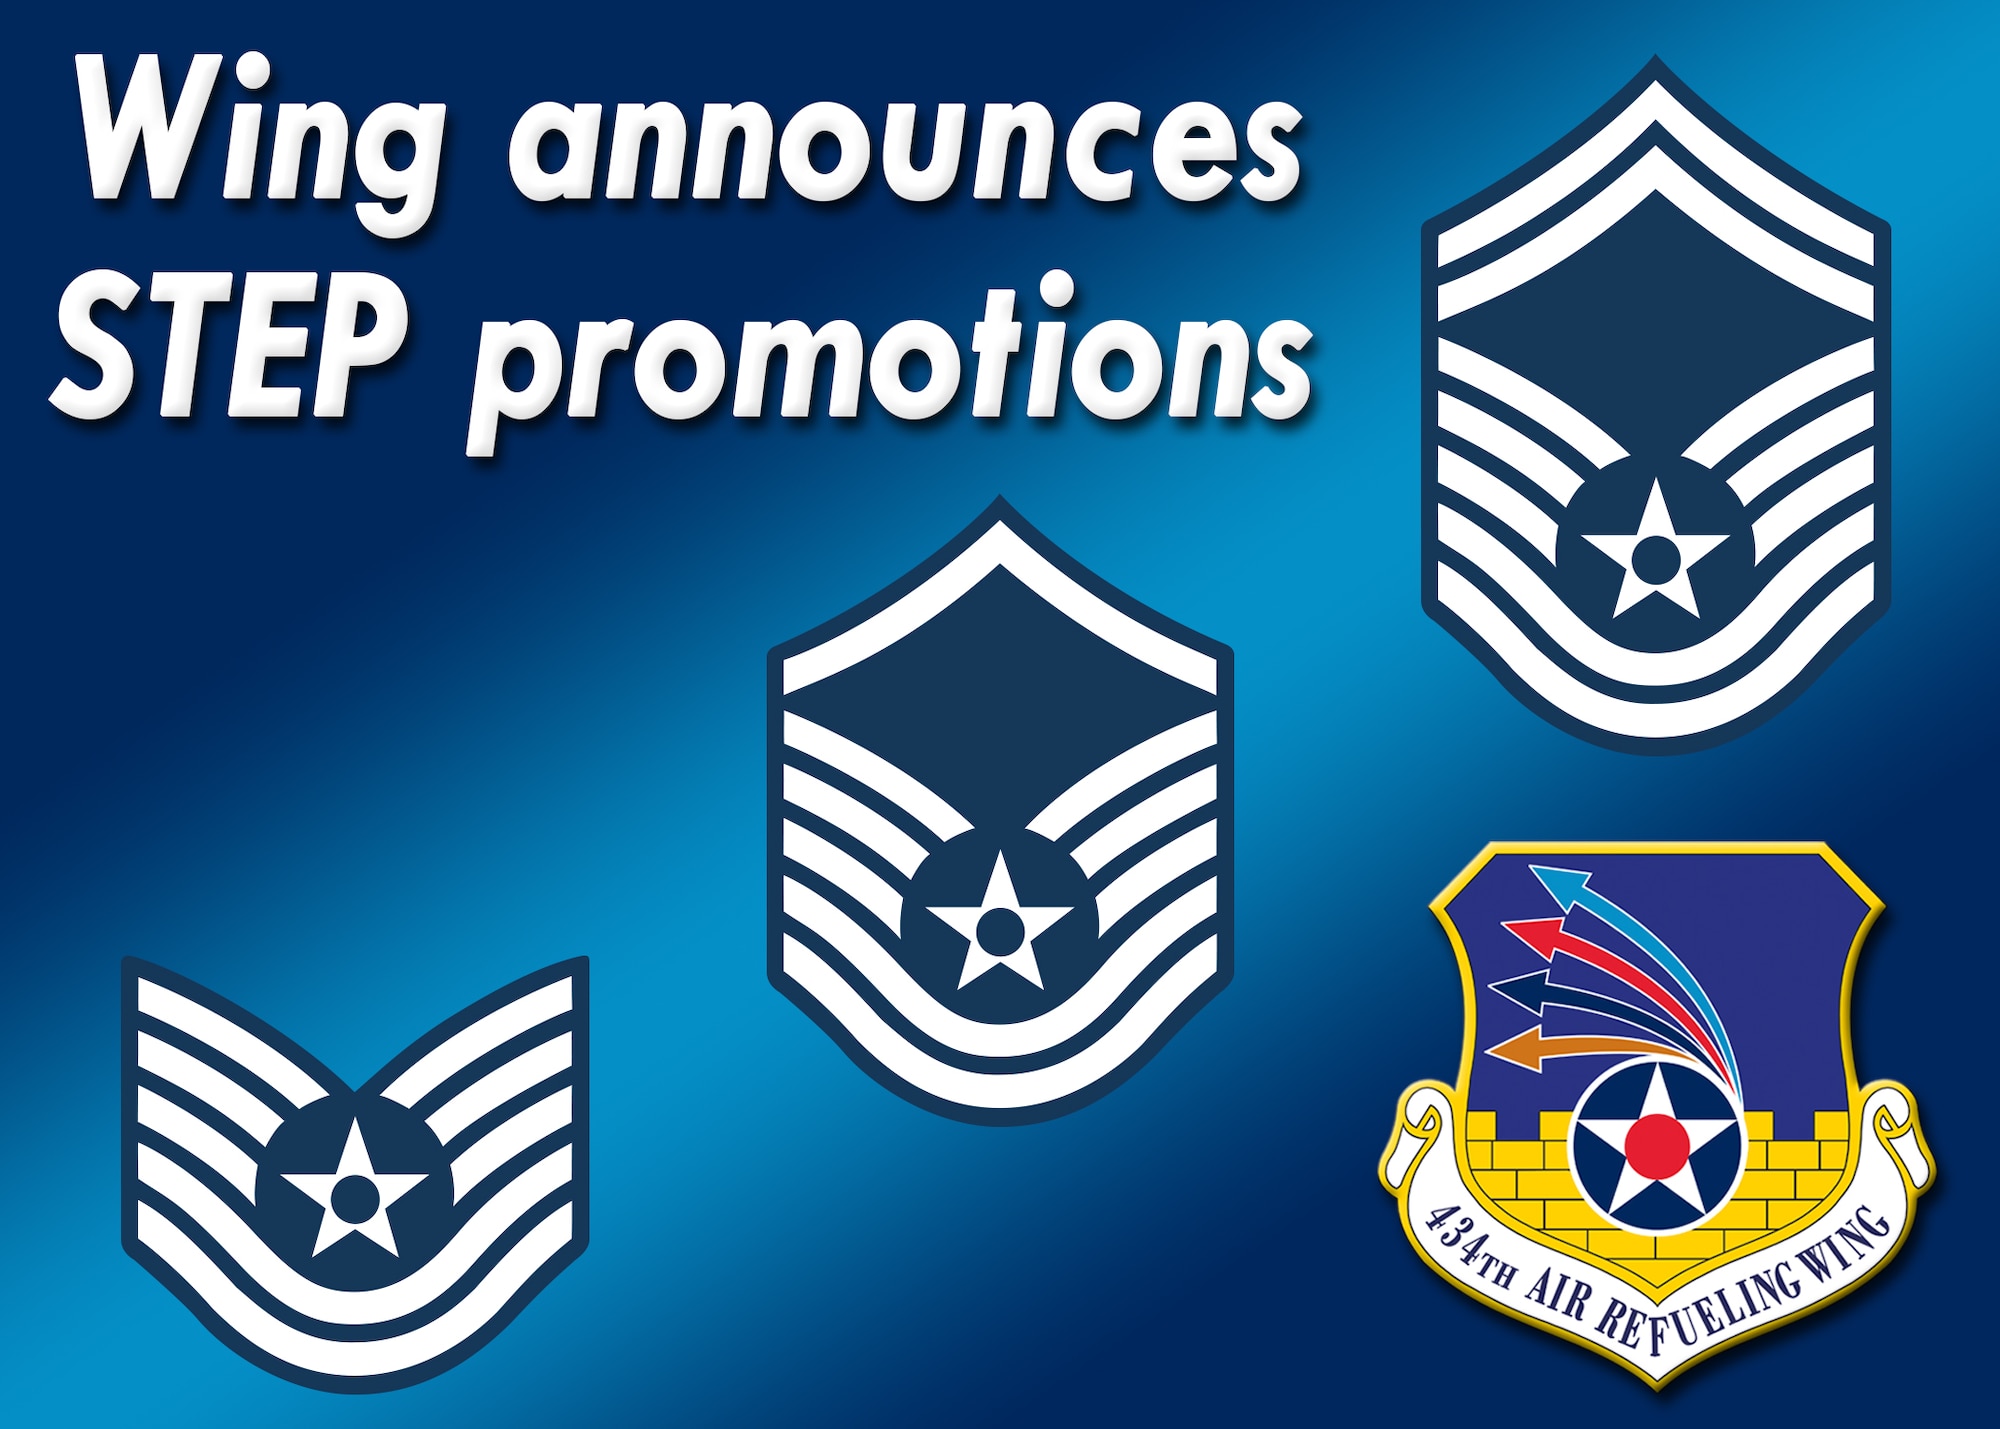 STEP II is a commanders program designed to promote the most deserving Airmen, especially those who are blocked from promotion due to lack of position vacancies common in reserve units. (U.S. Air Force graphic / Tech. Sgt. Benjamin Mota)